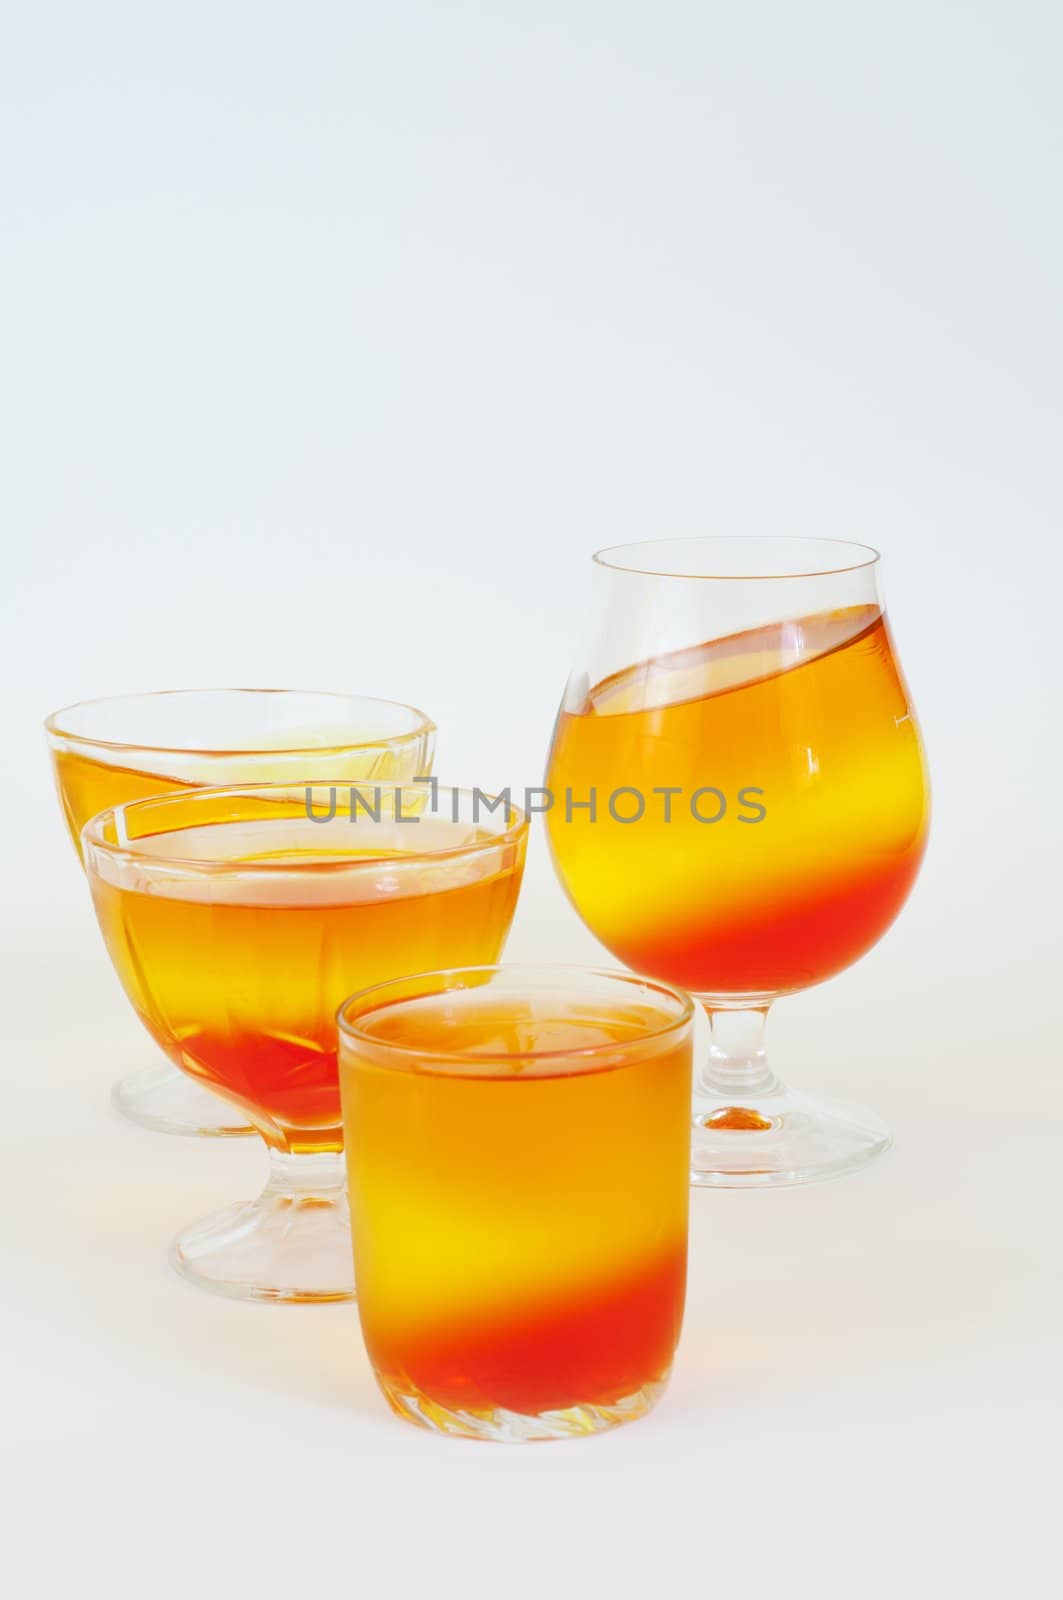 tricolor jelly in a glass on a white background